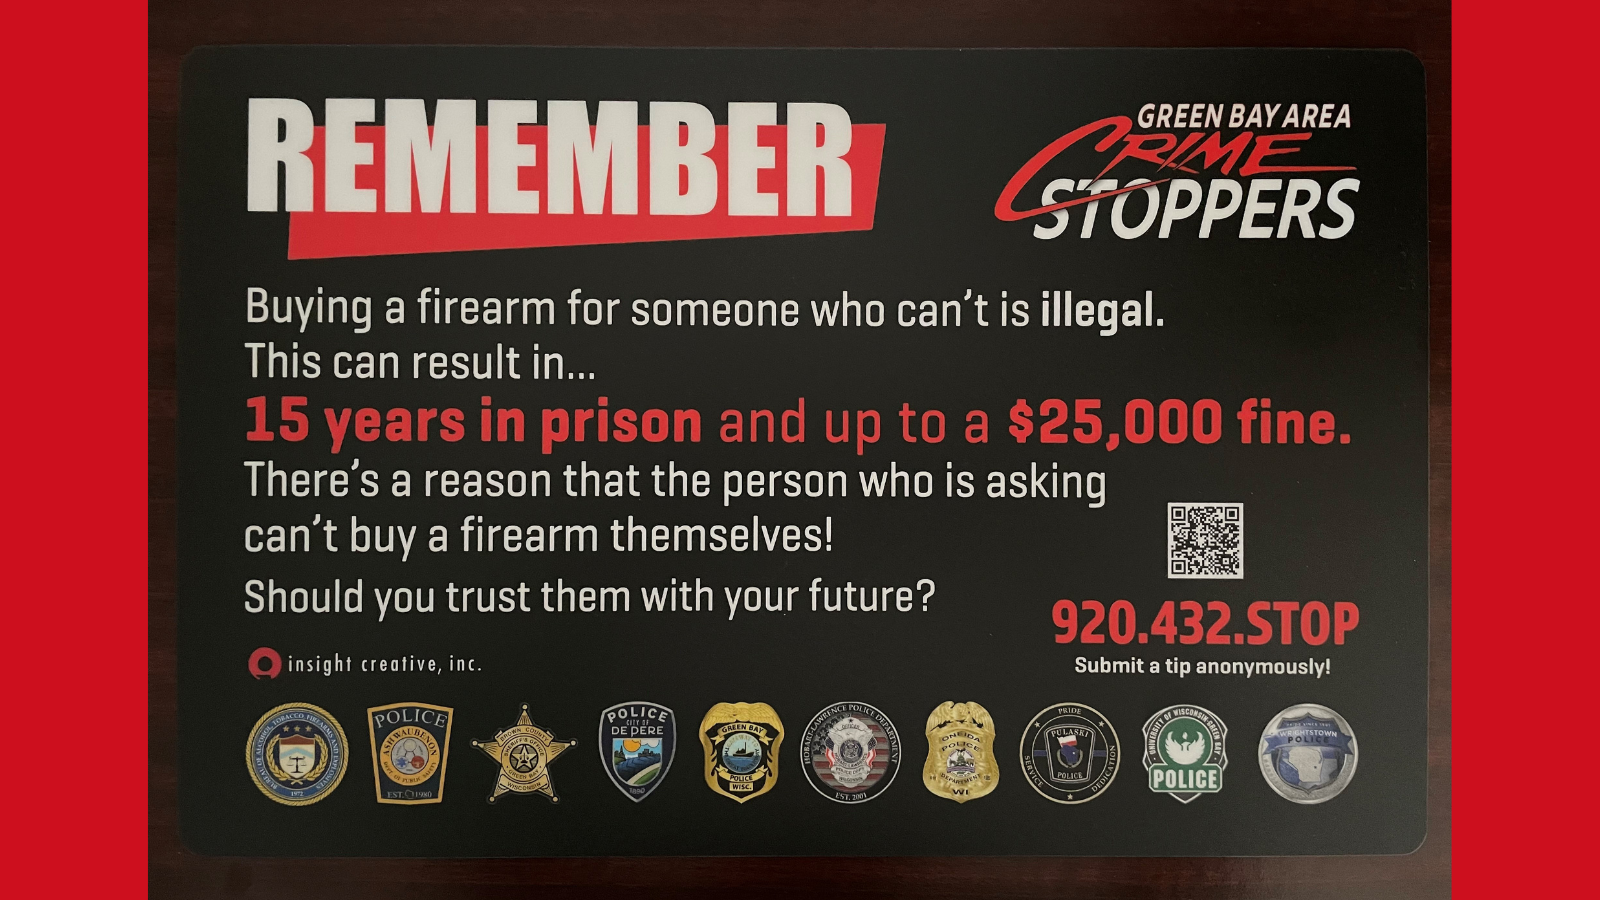 Brown County partners with ATF and Crime Stoppers to deter illegal firearm purchases